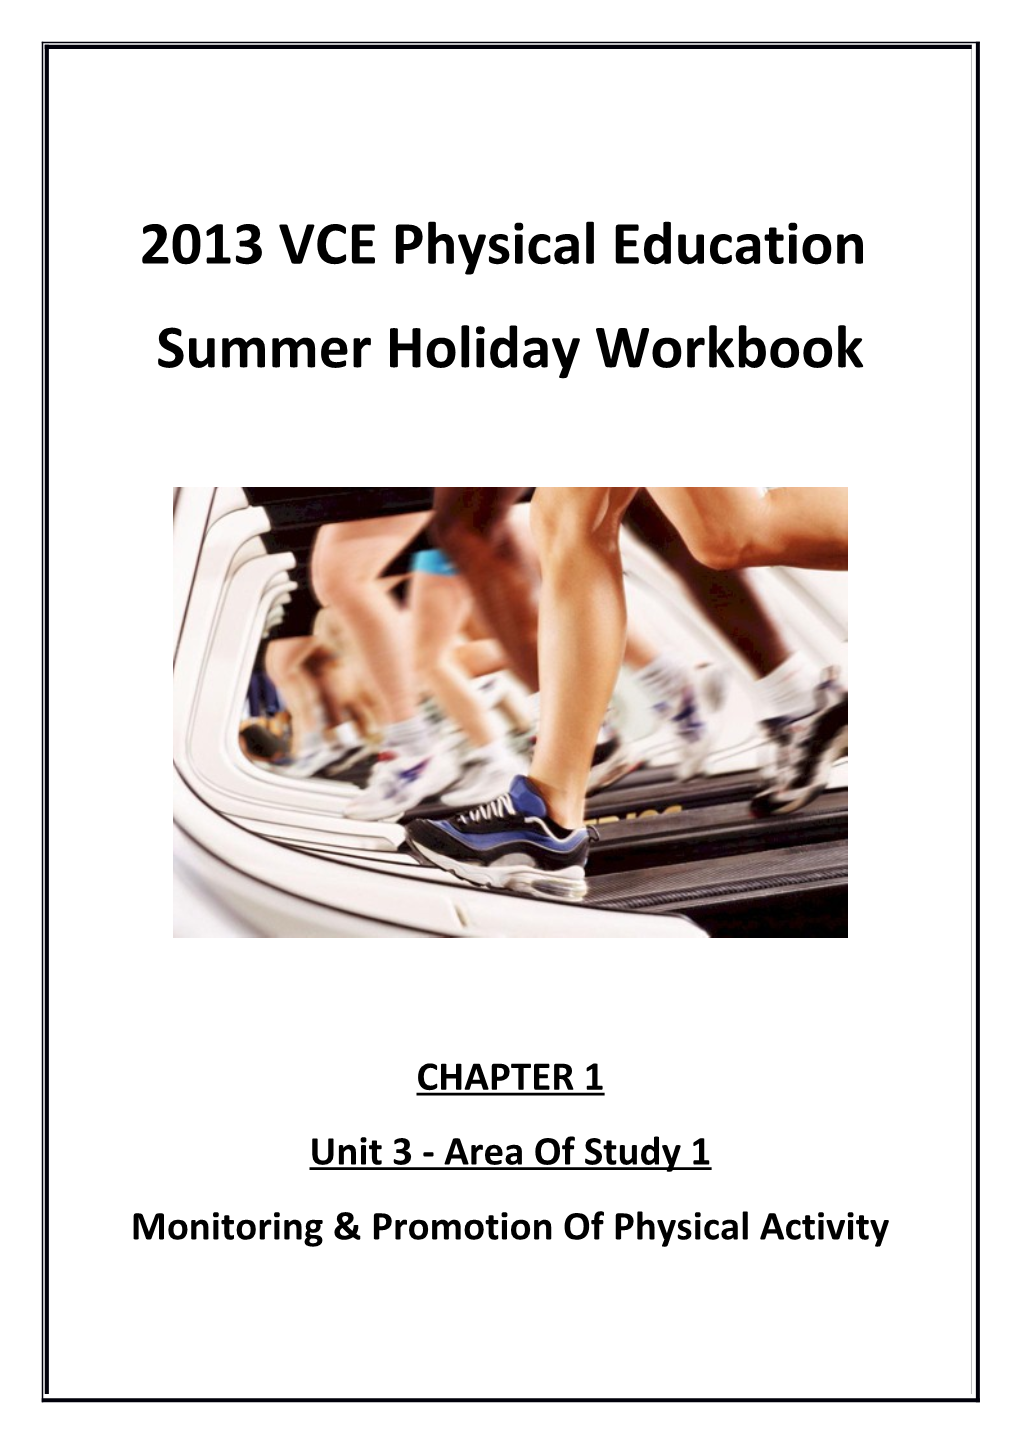 2013 VCE Physical Education